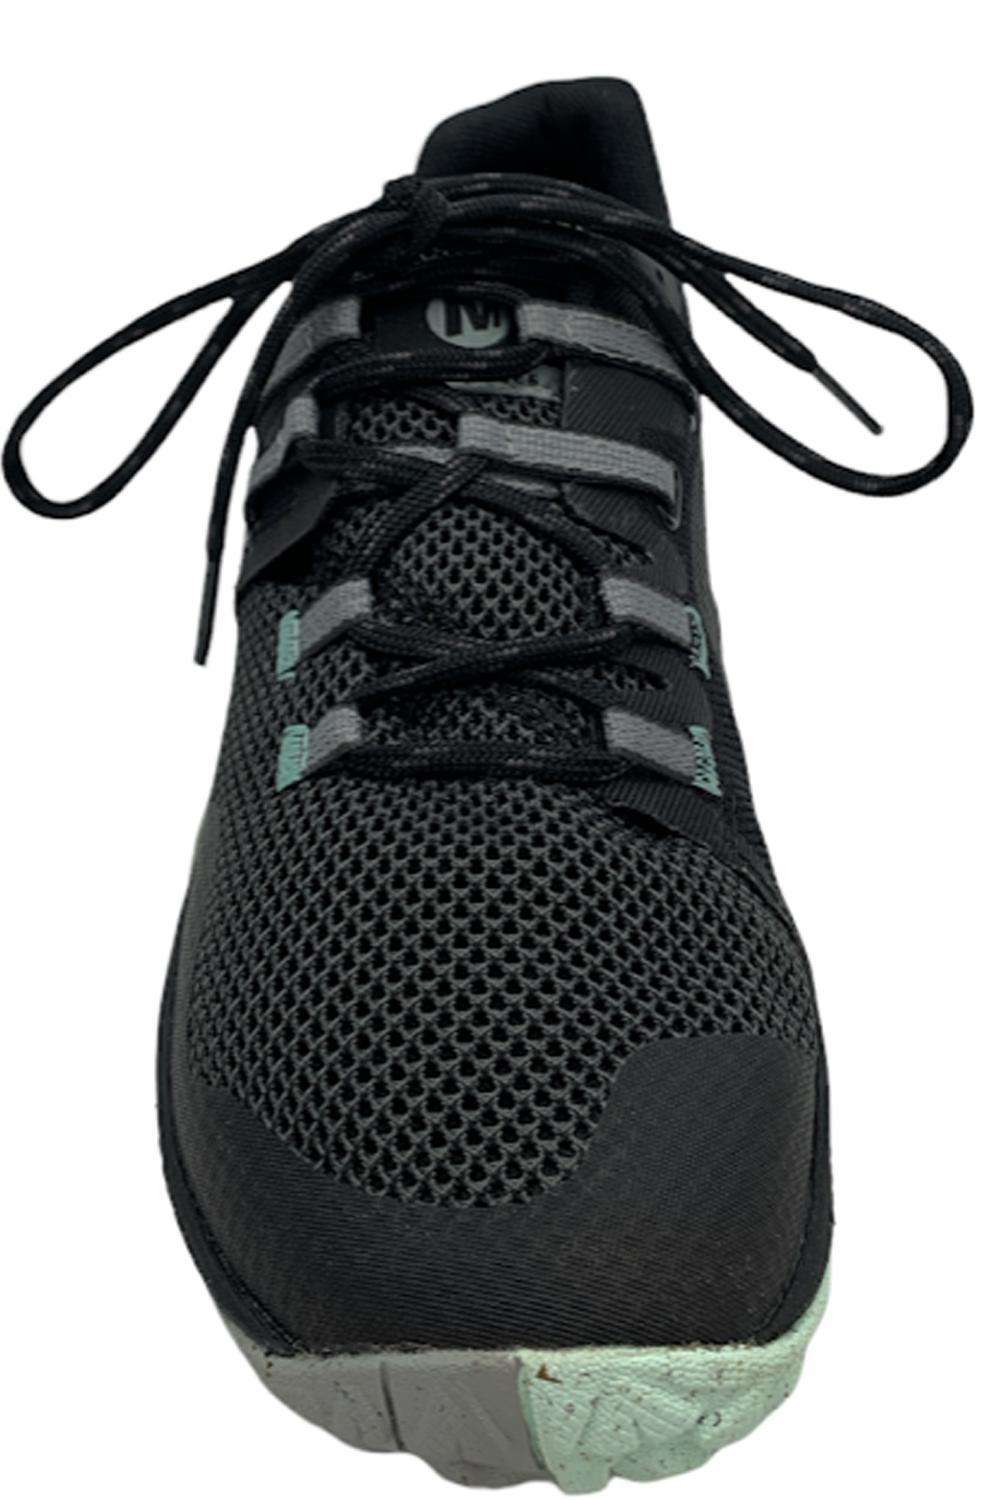 Merrell Lace-Up Performance Sneakers Trail Glove 6 Black | Jender